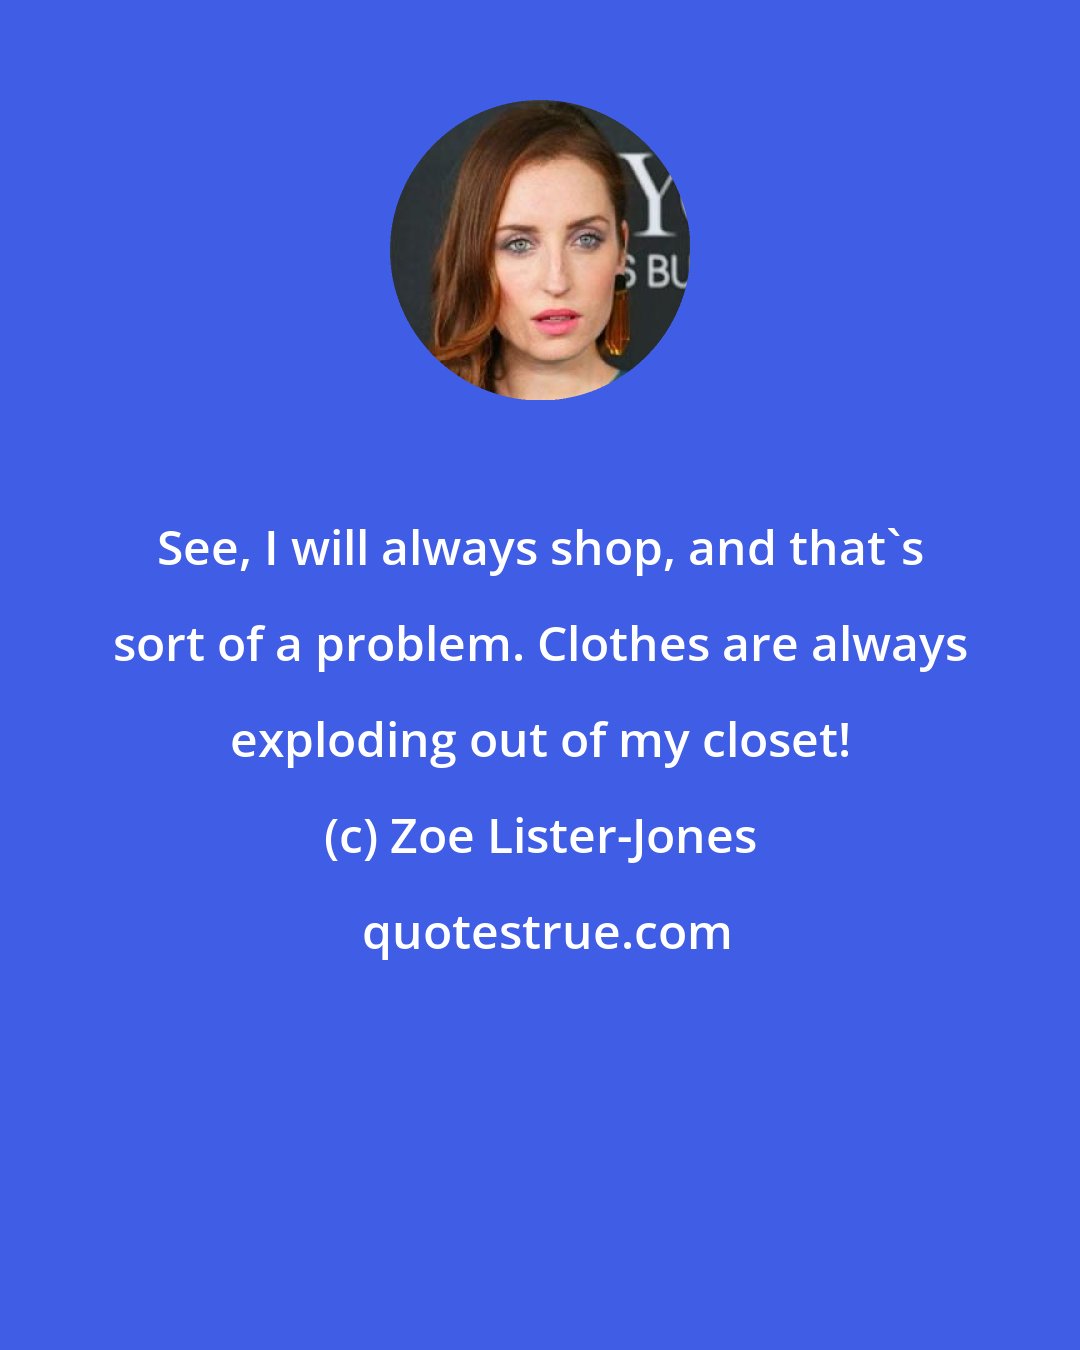 Zoe Lister-Jones: See, I will always shop, and that's sort of a problem. Clothes are always exploding out of my closet!